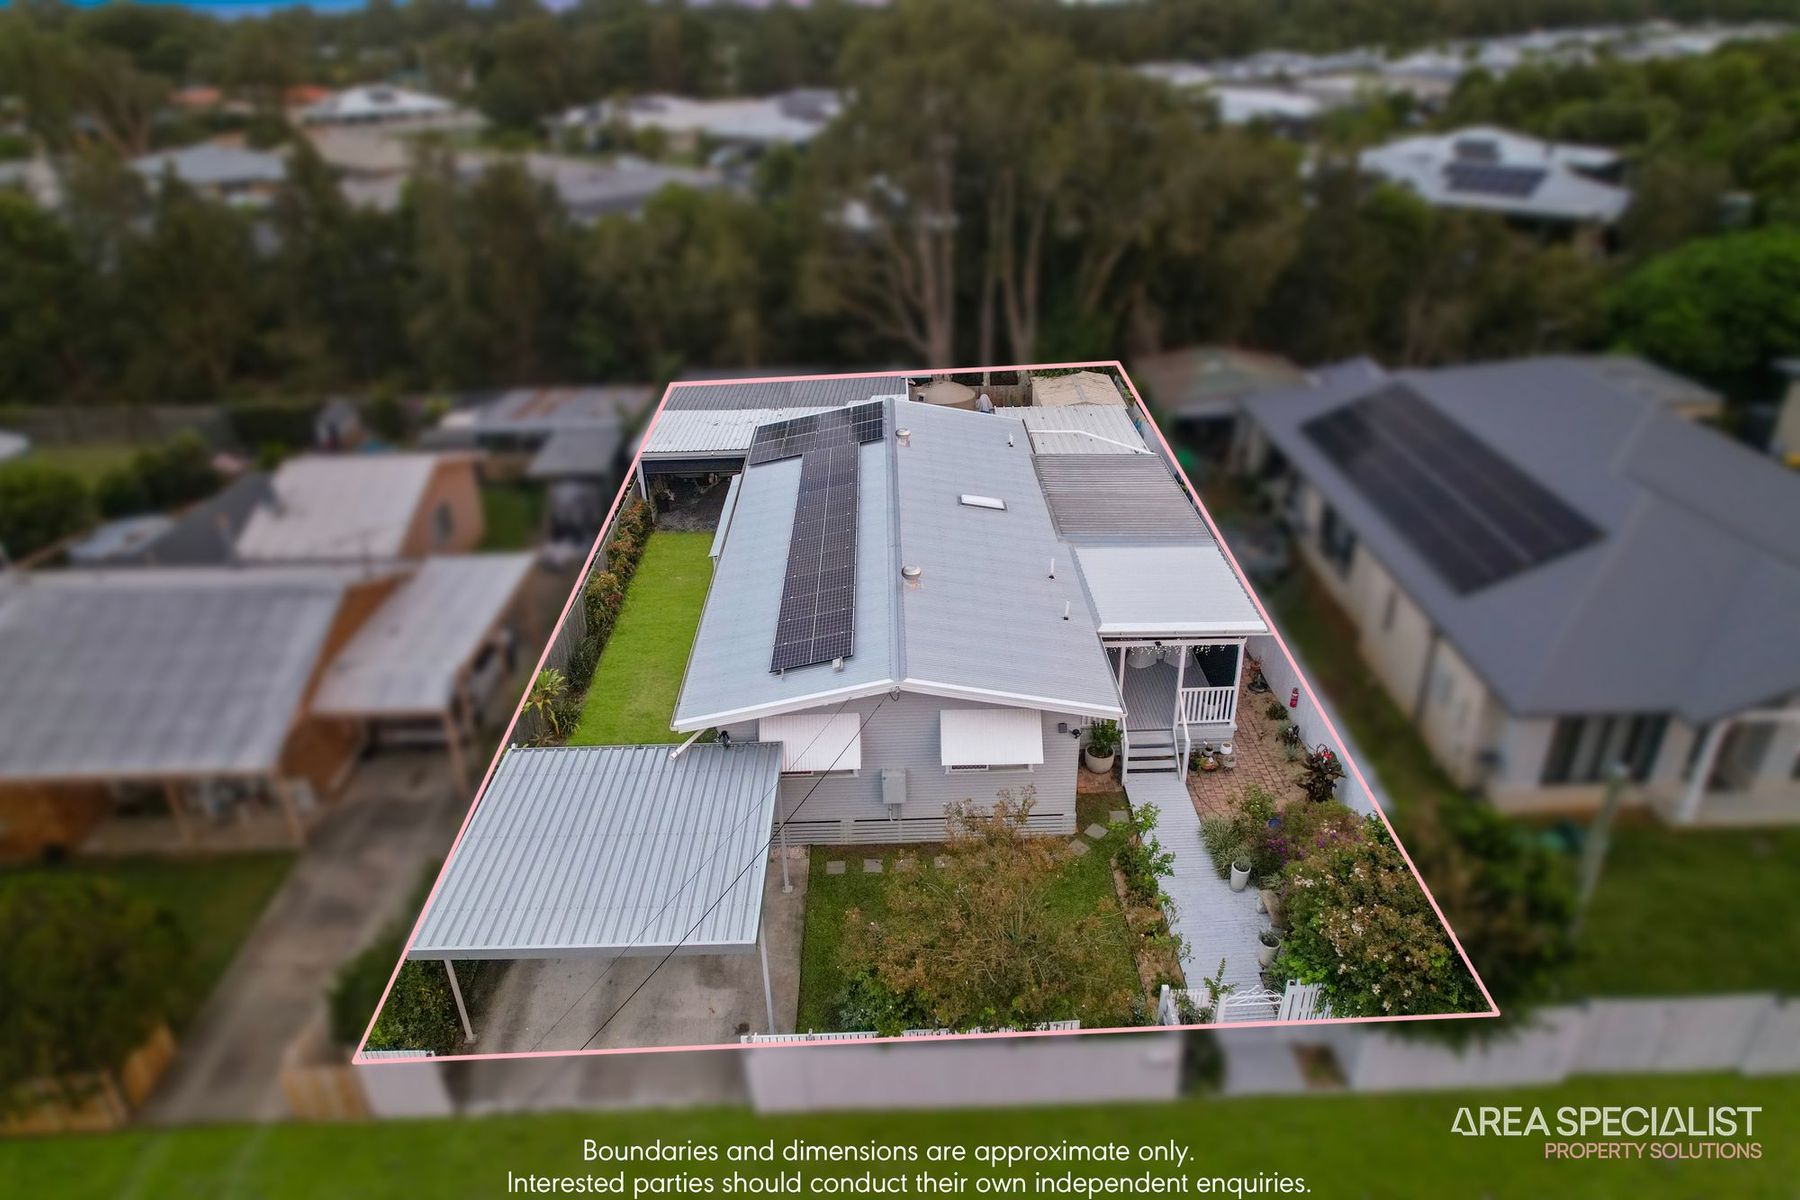 1110 Pimpama Jacobs Well Rd, Jacobs Well QLD 4208 Drone (8)